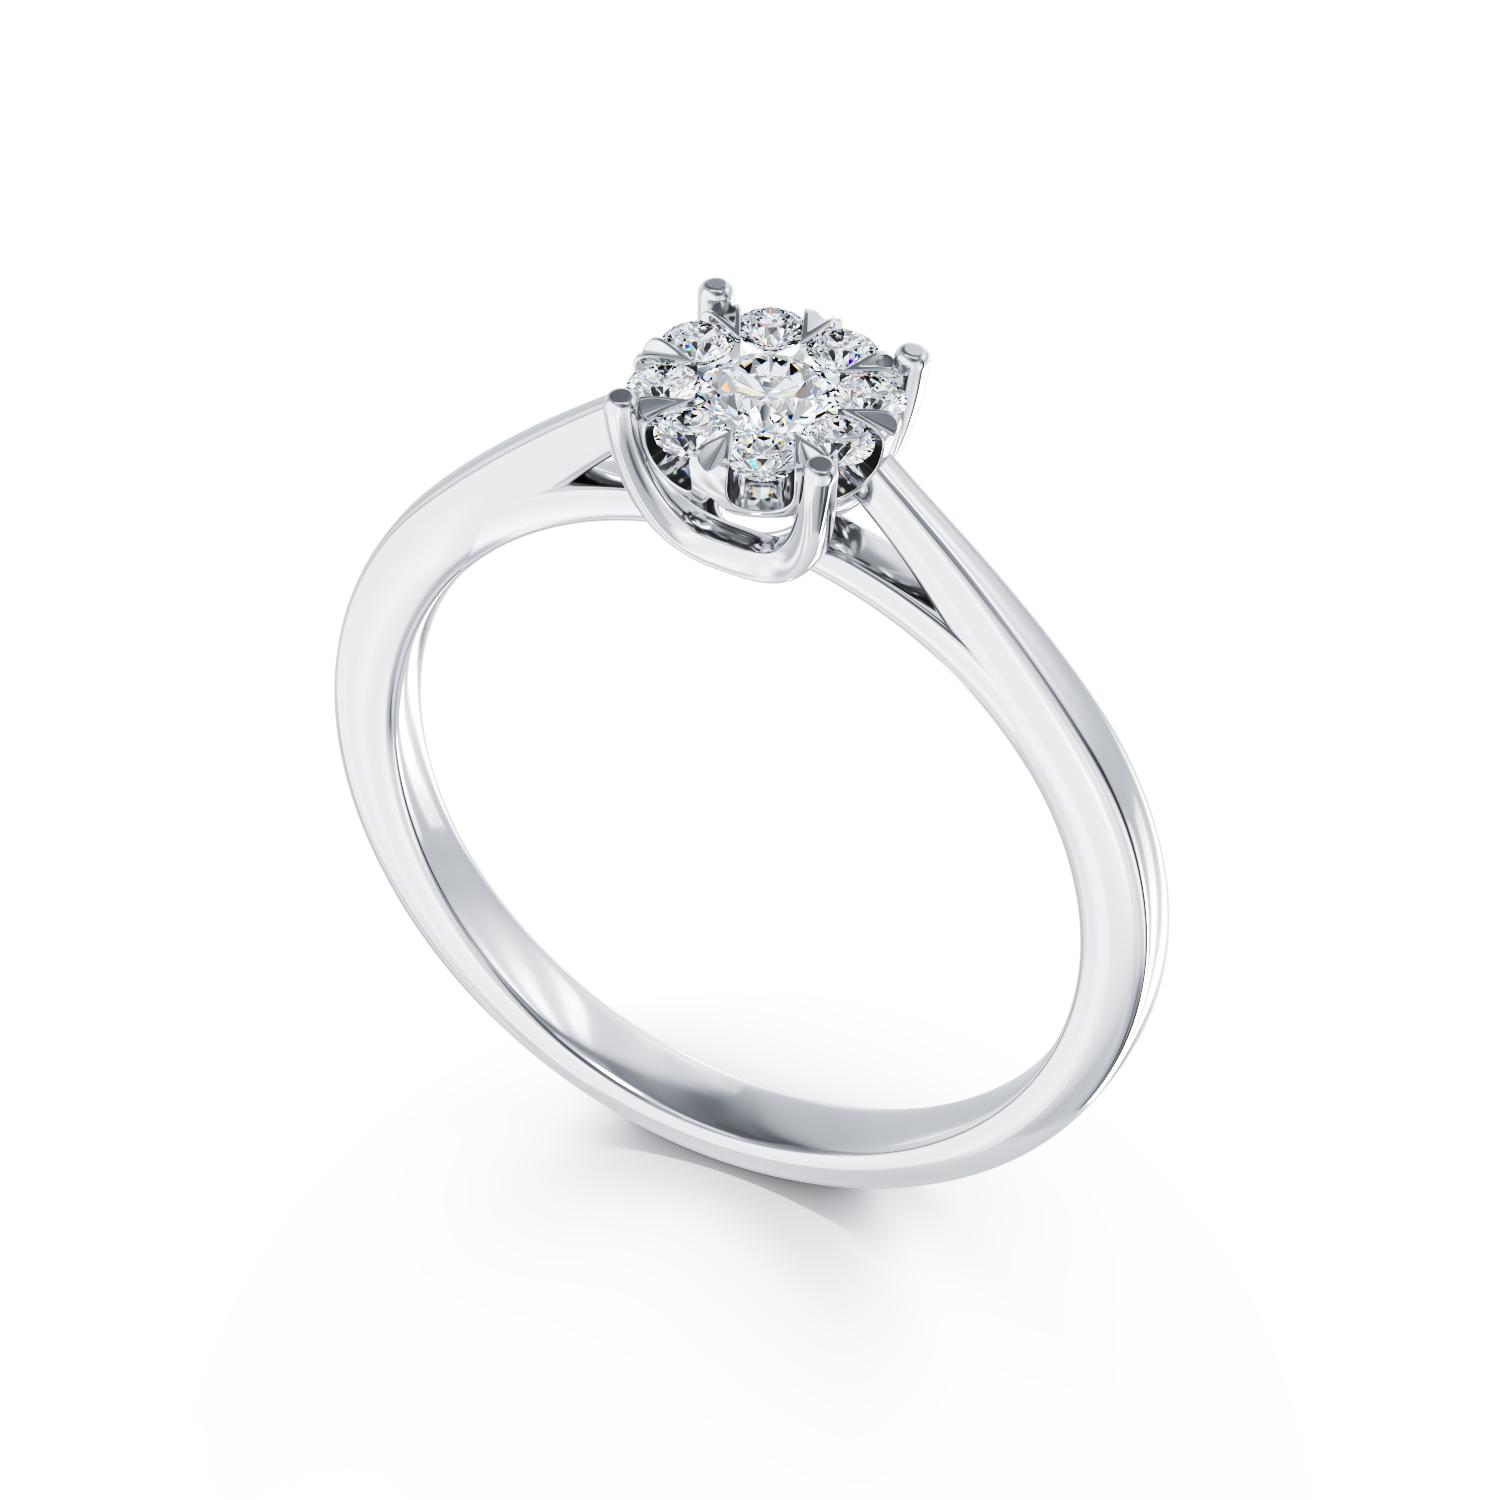 18K white gold engagement ring with 0.15ct diamonds